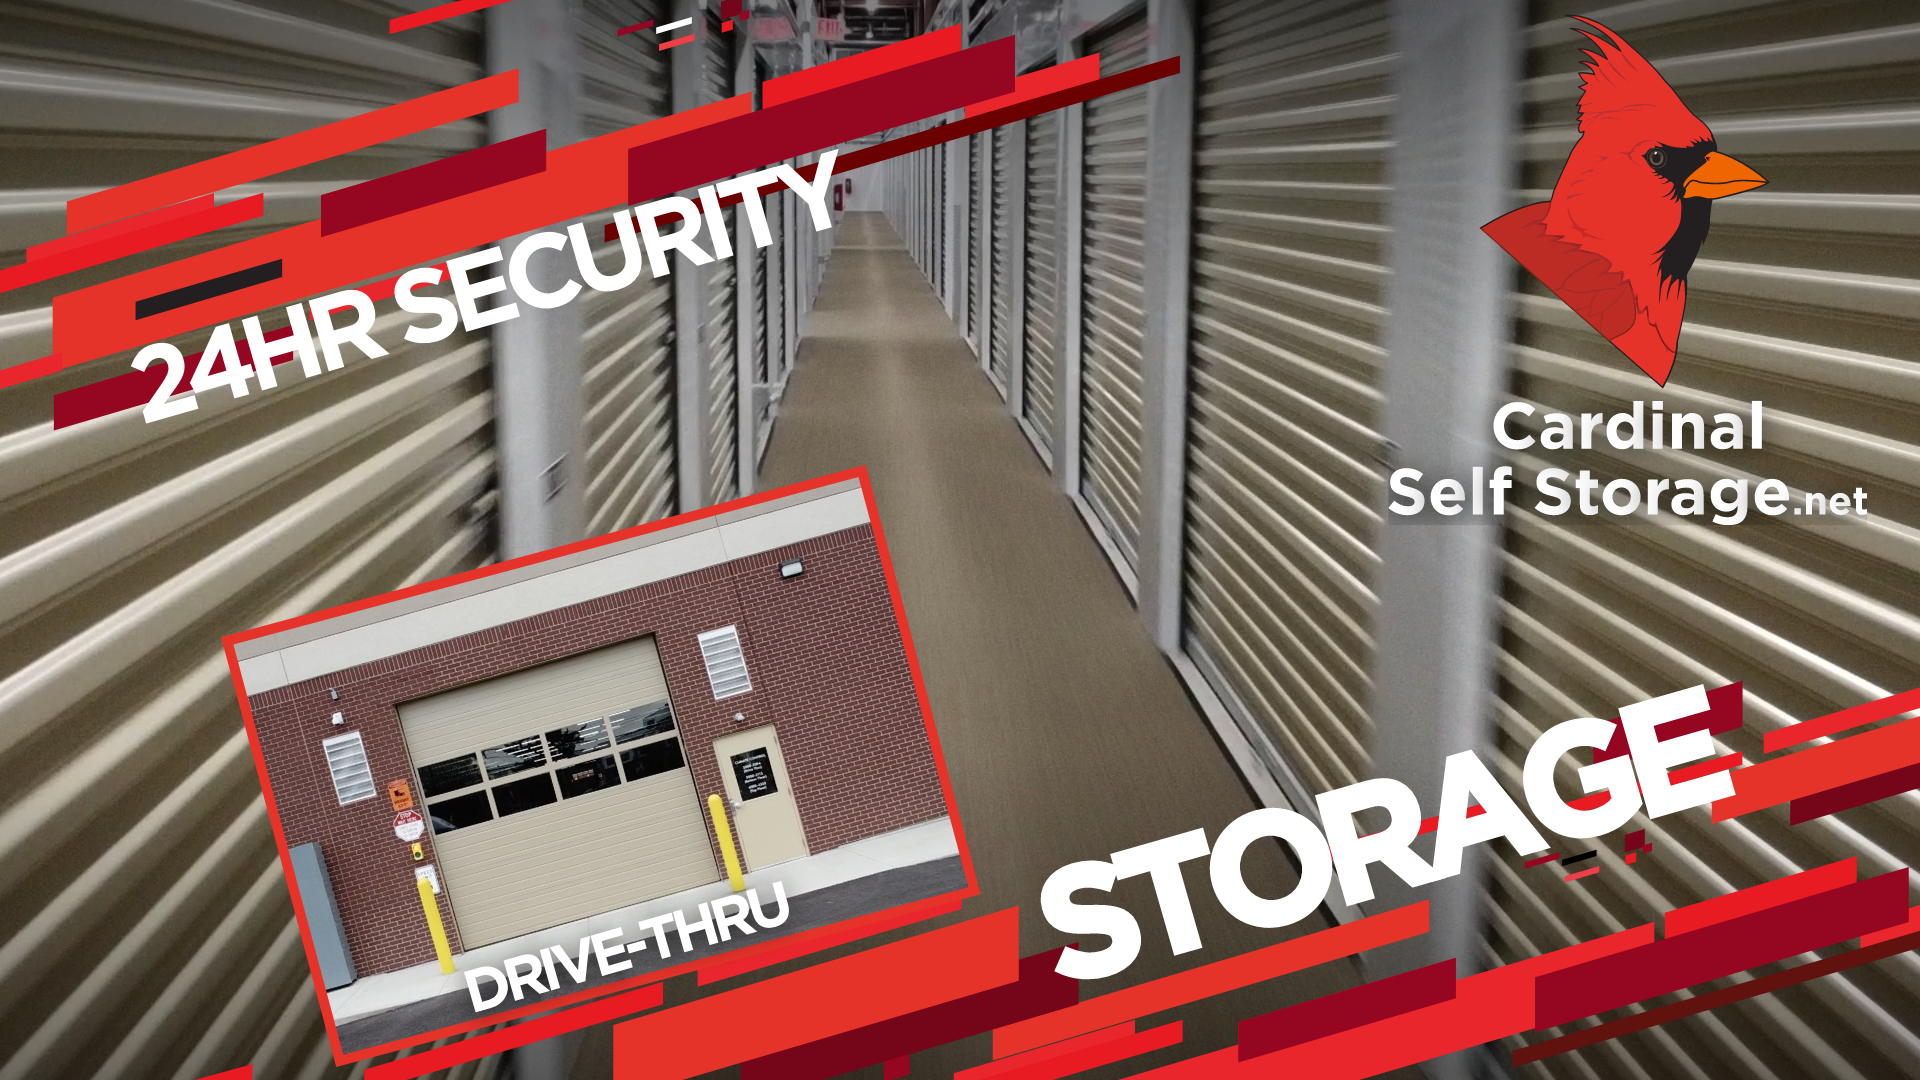 24 Hour Security with Drive Thru storage at Trabue Rd